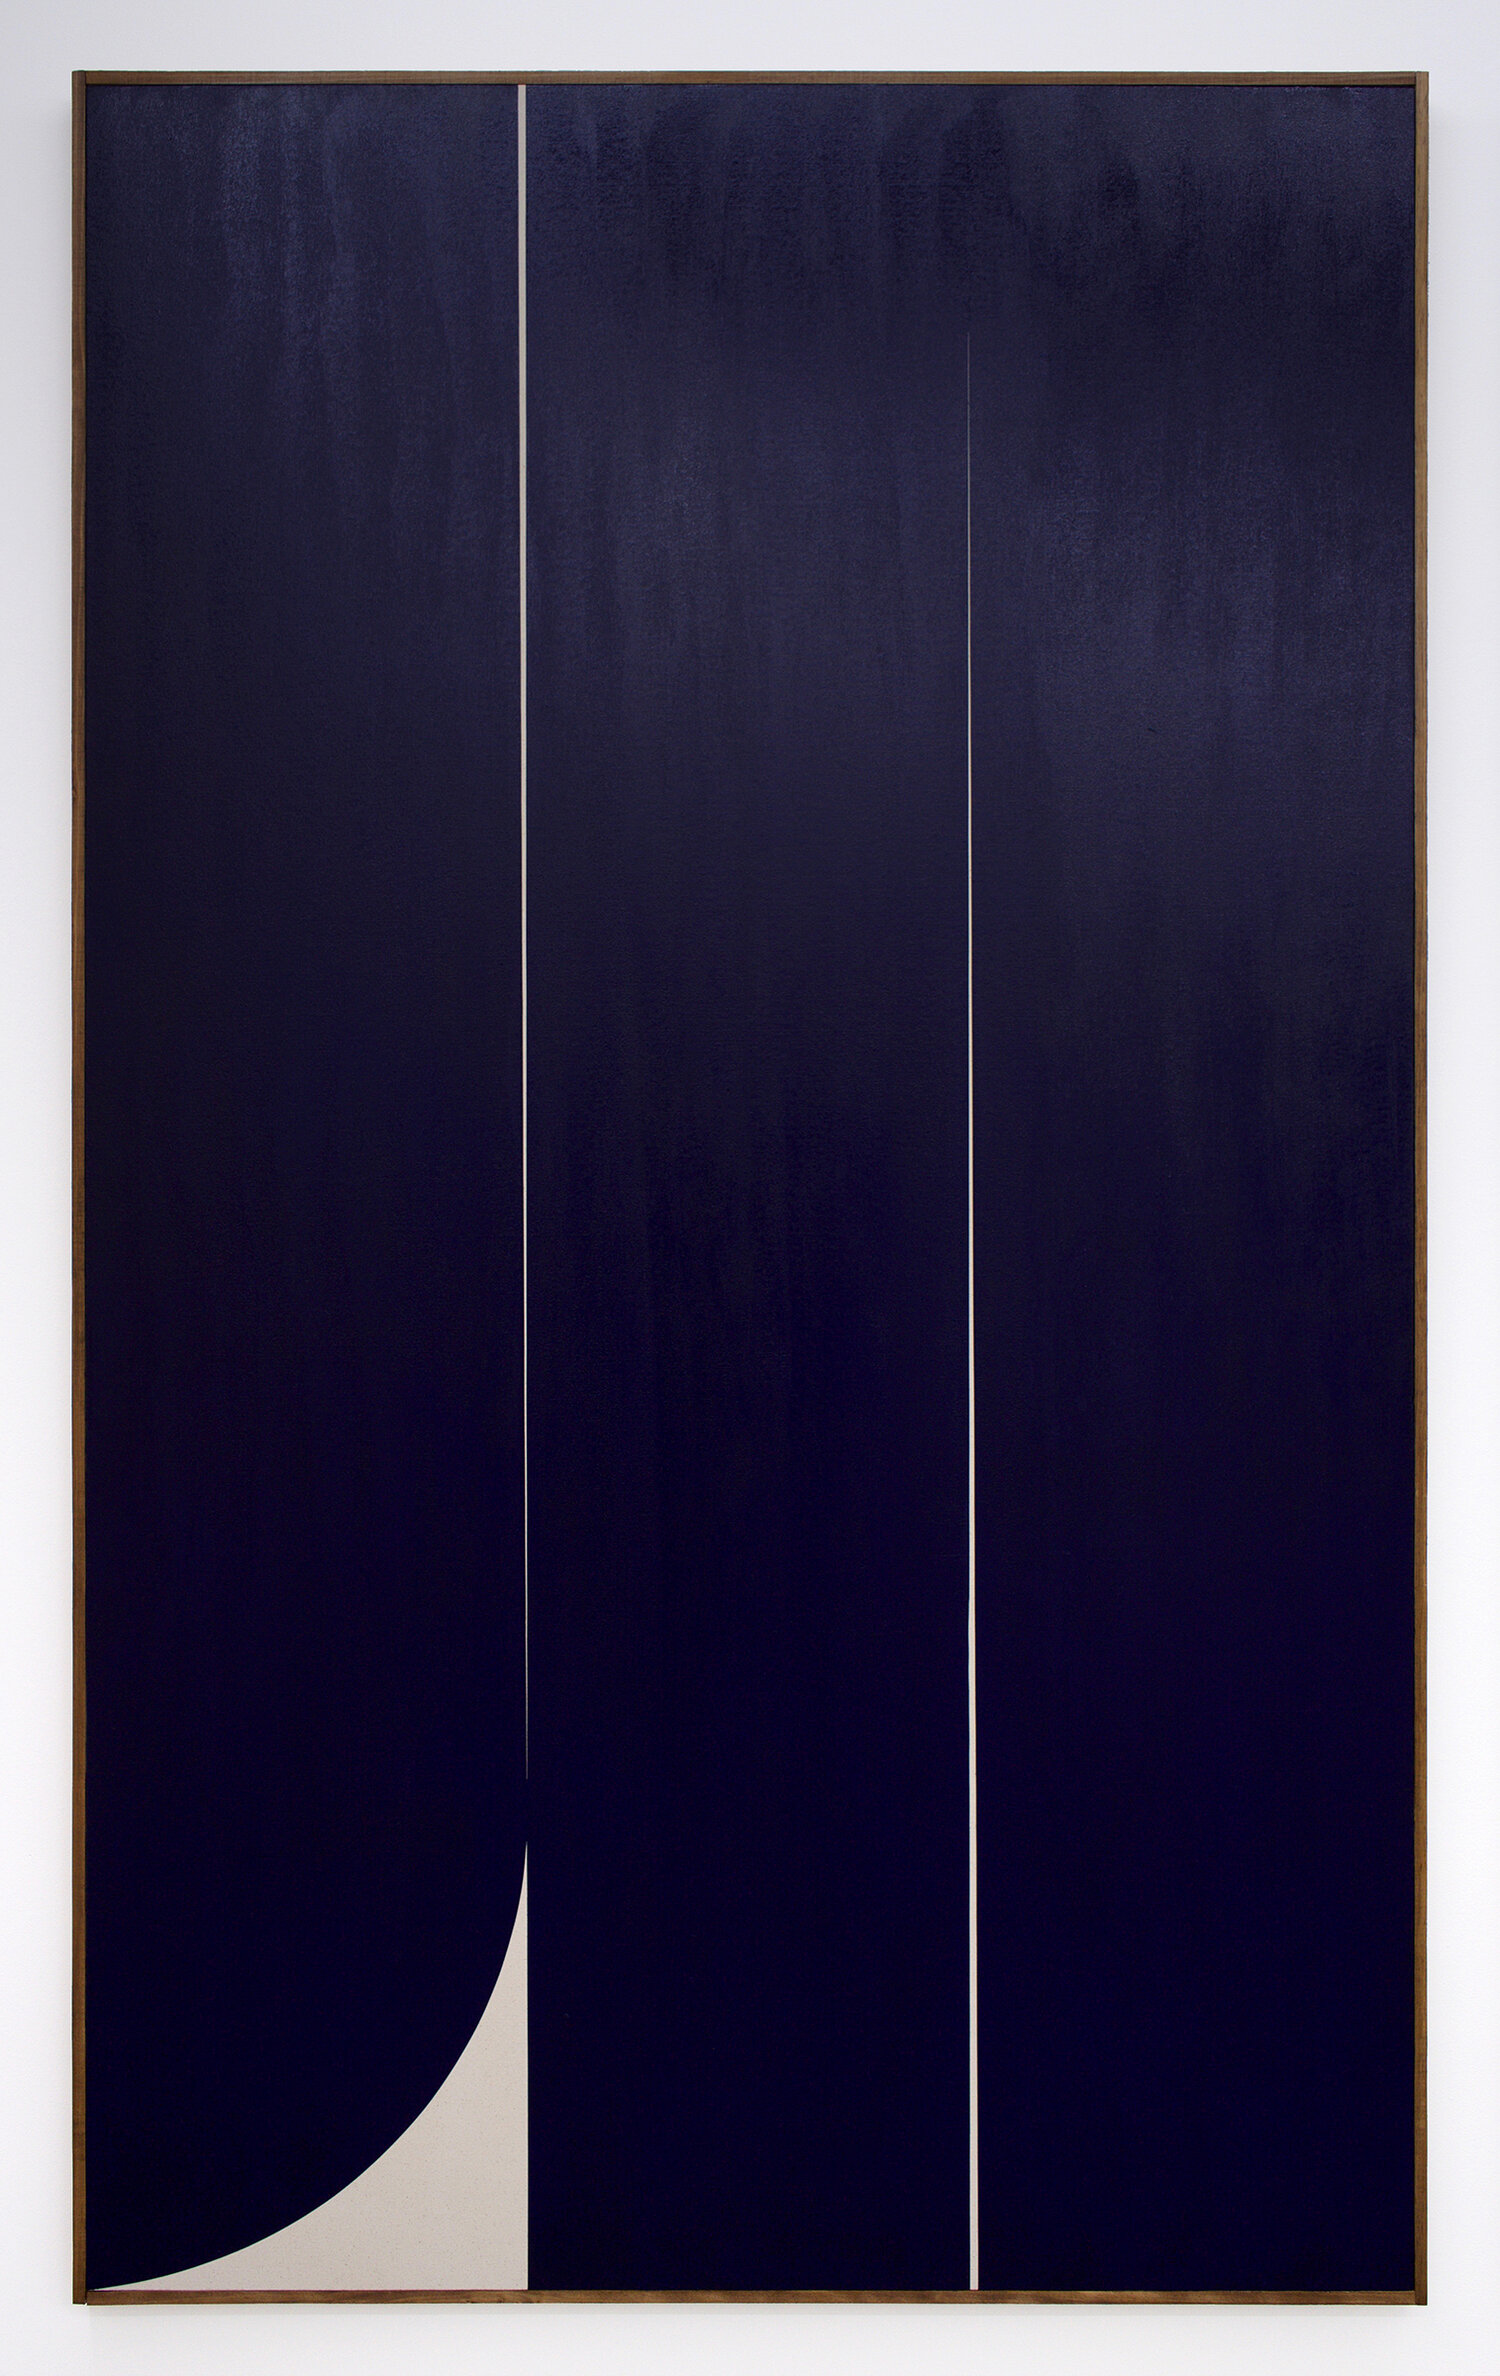  JOHNNY ABRAHAMS Untitled (Blue 1), 2019 oil on canvas, 80” x 48” 